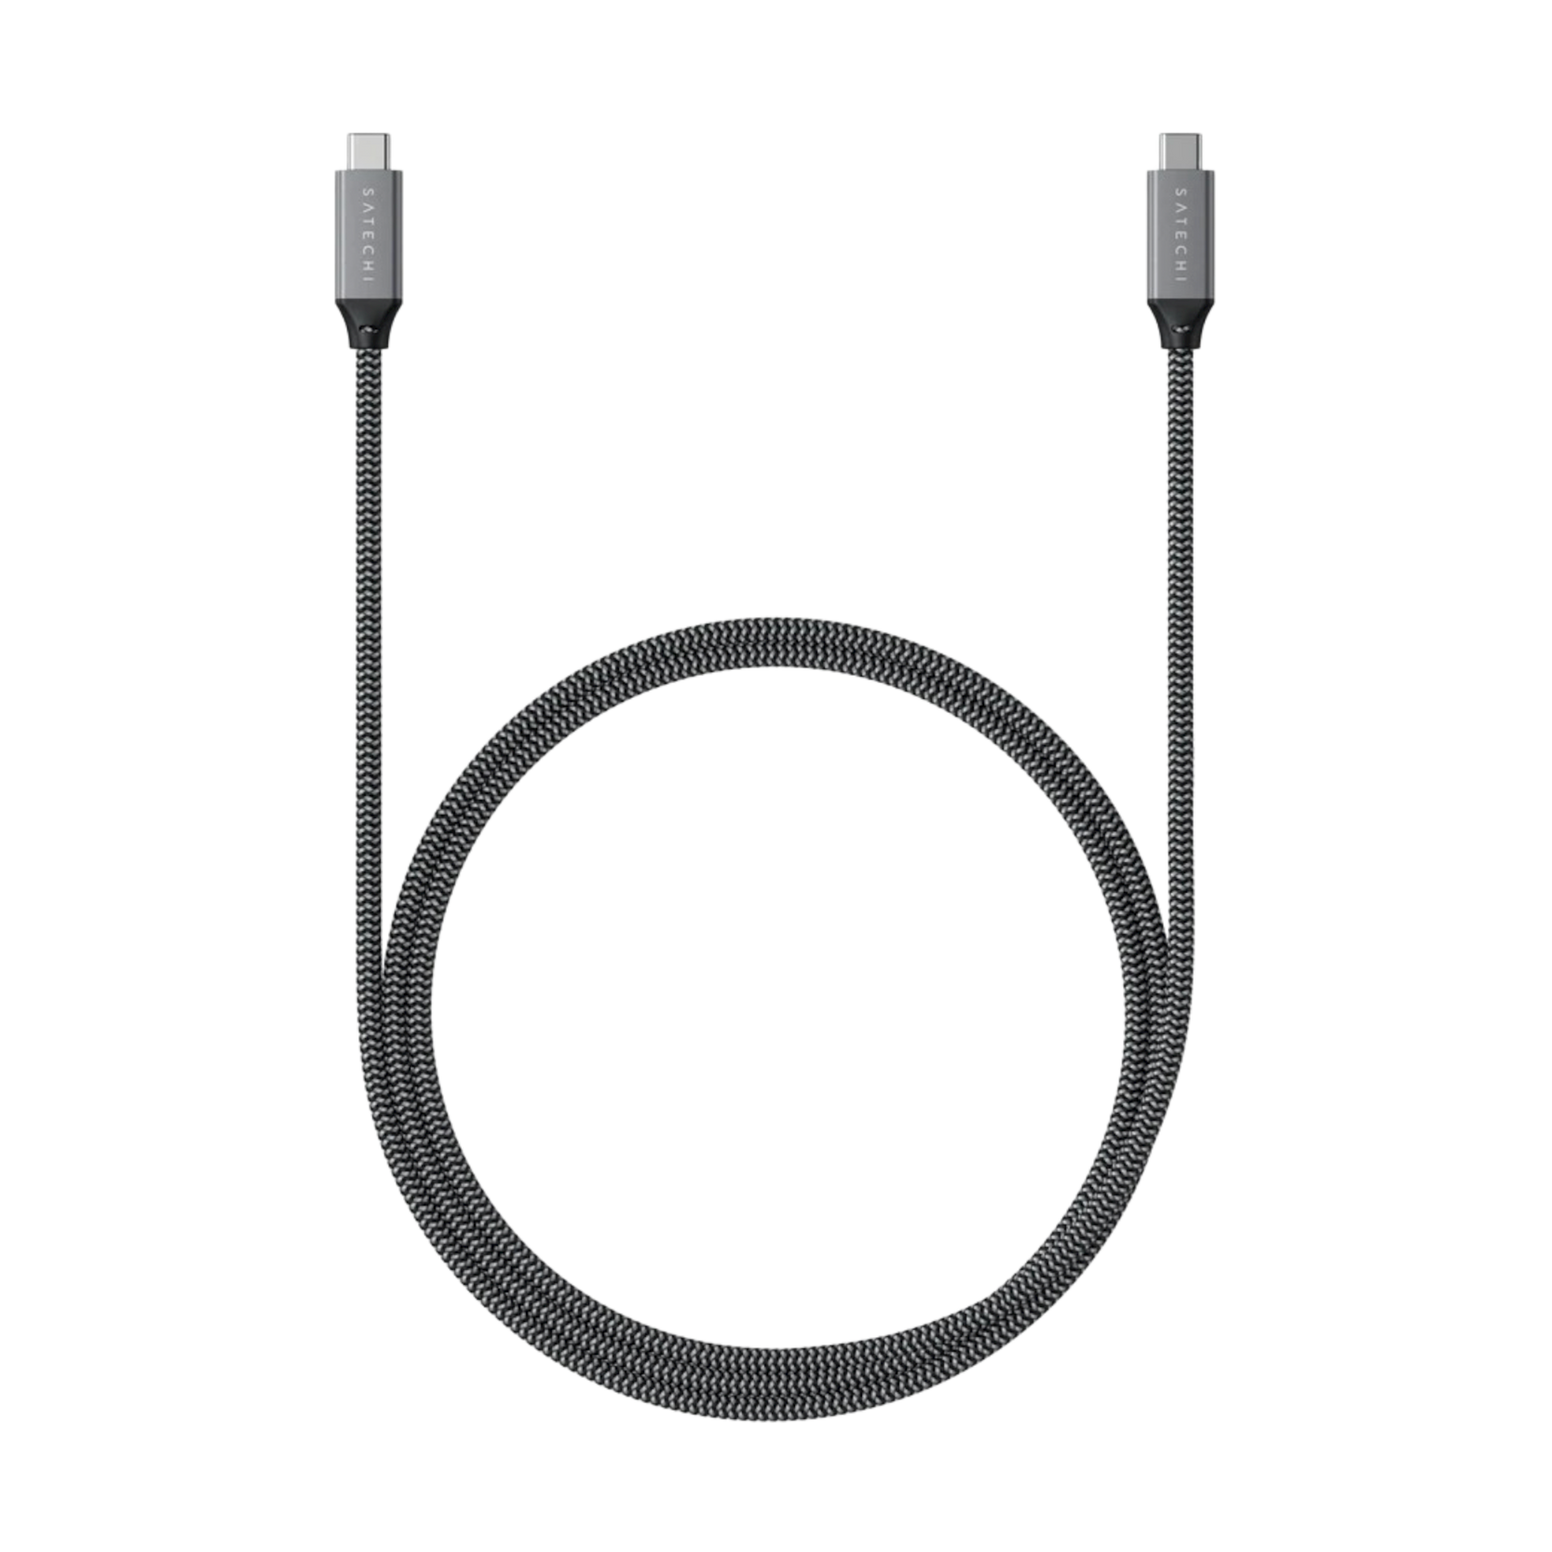 Satechi USB4 C-to-C Cable - 0.8m